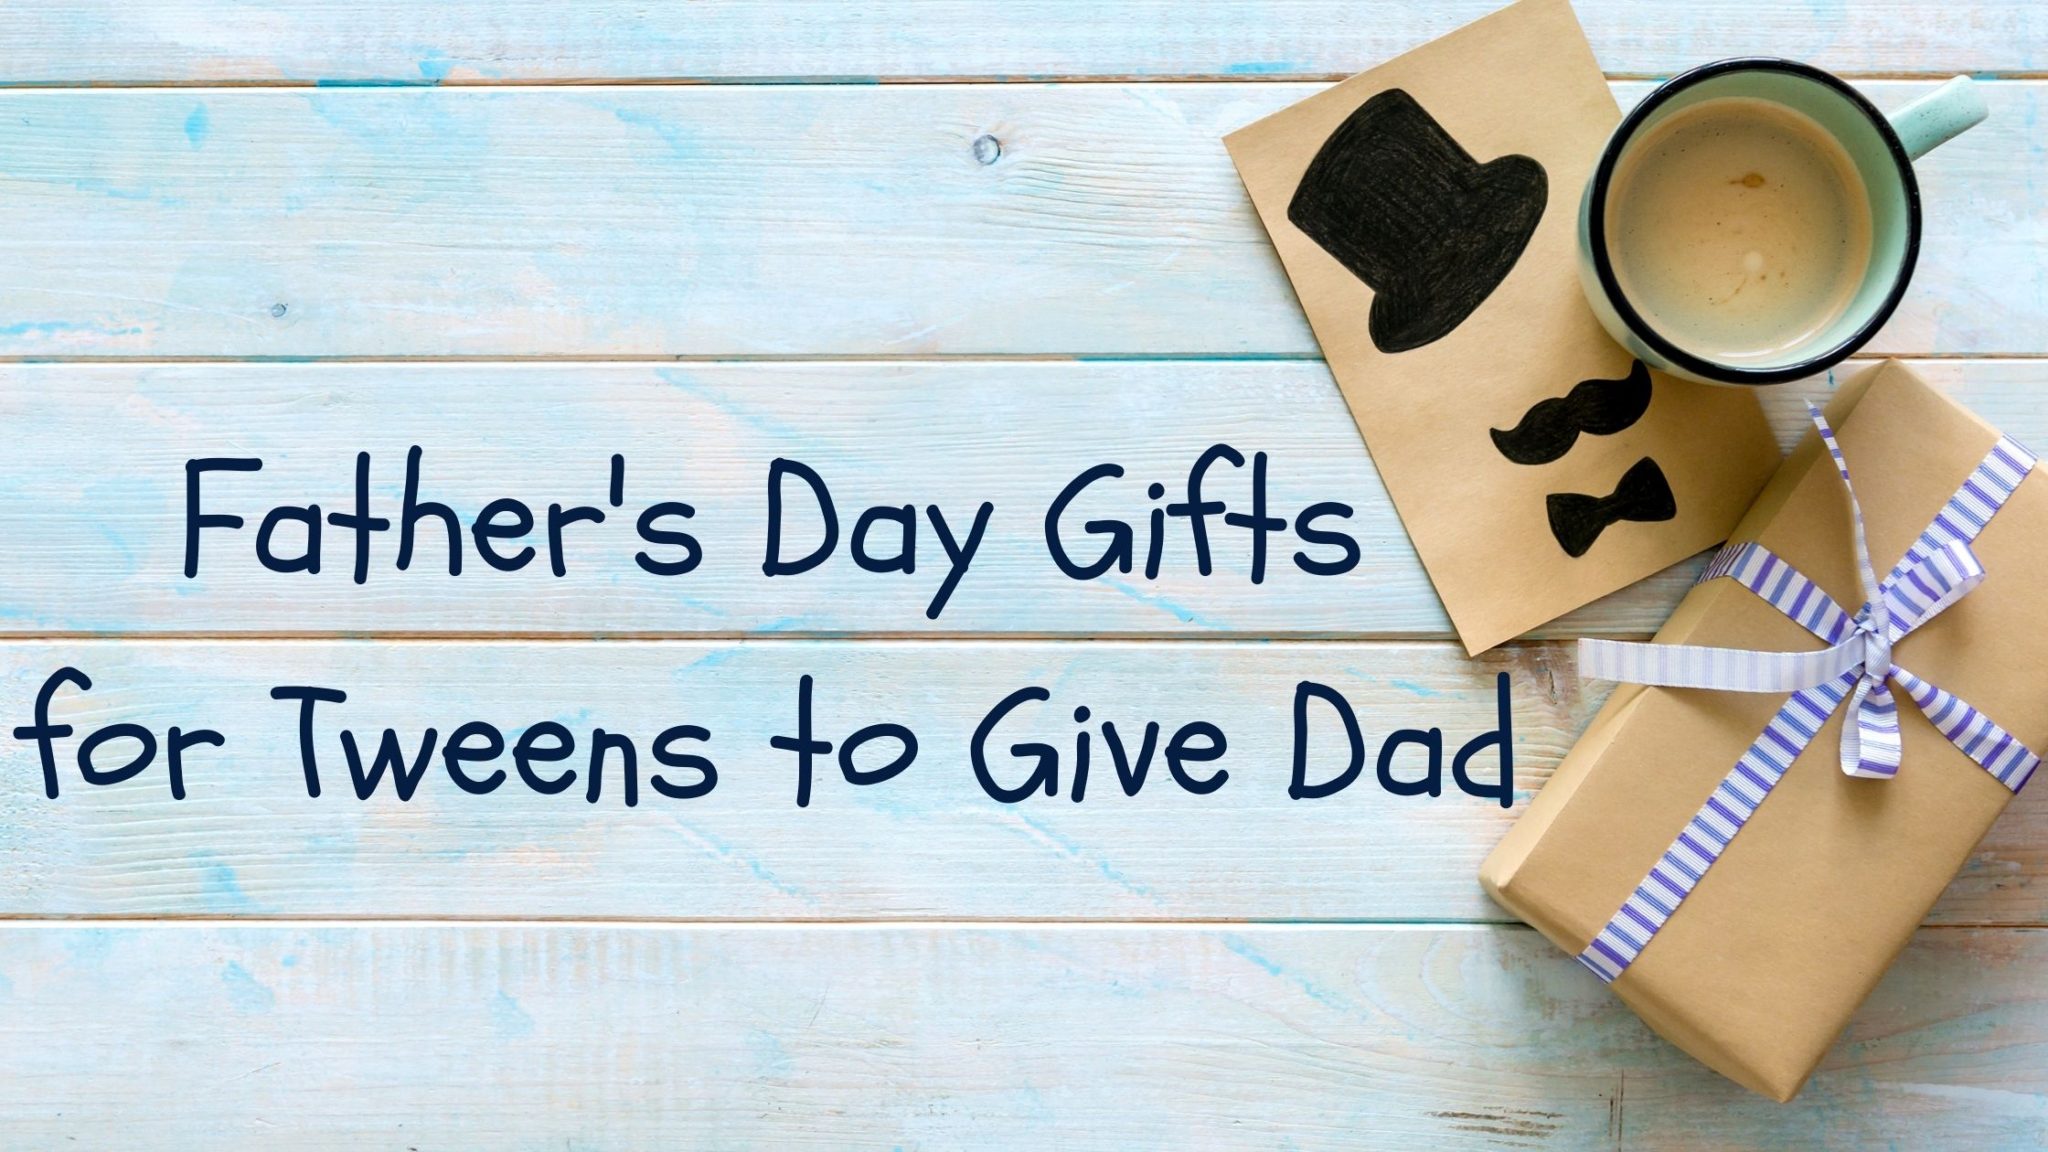 https://thesecretlifeofhomeschoolers.com/wp-content/uploads/2021/05/Fathers-Day-Gifts-for-Tweens-to-give-Dad-scaled.jpg